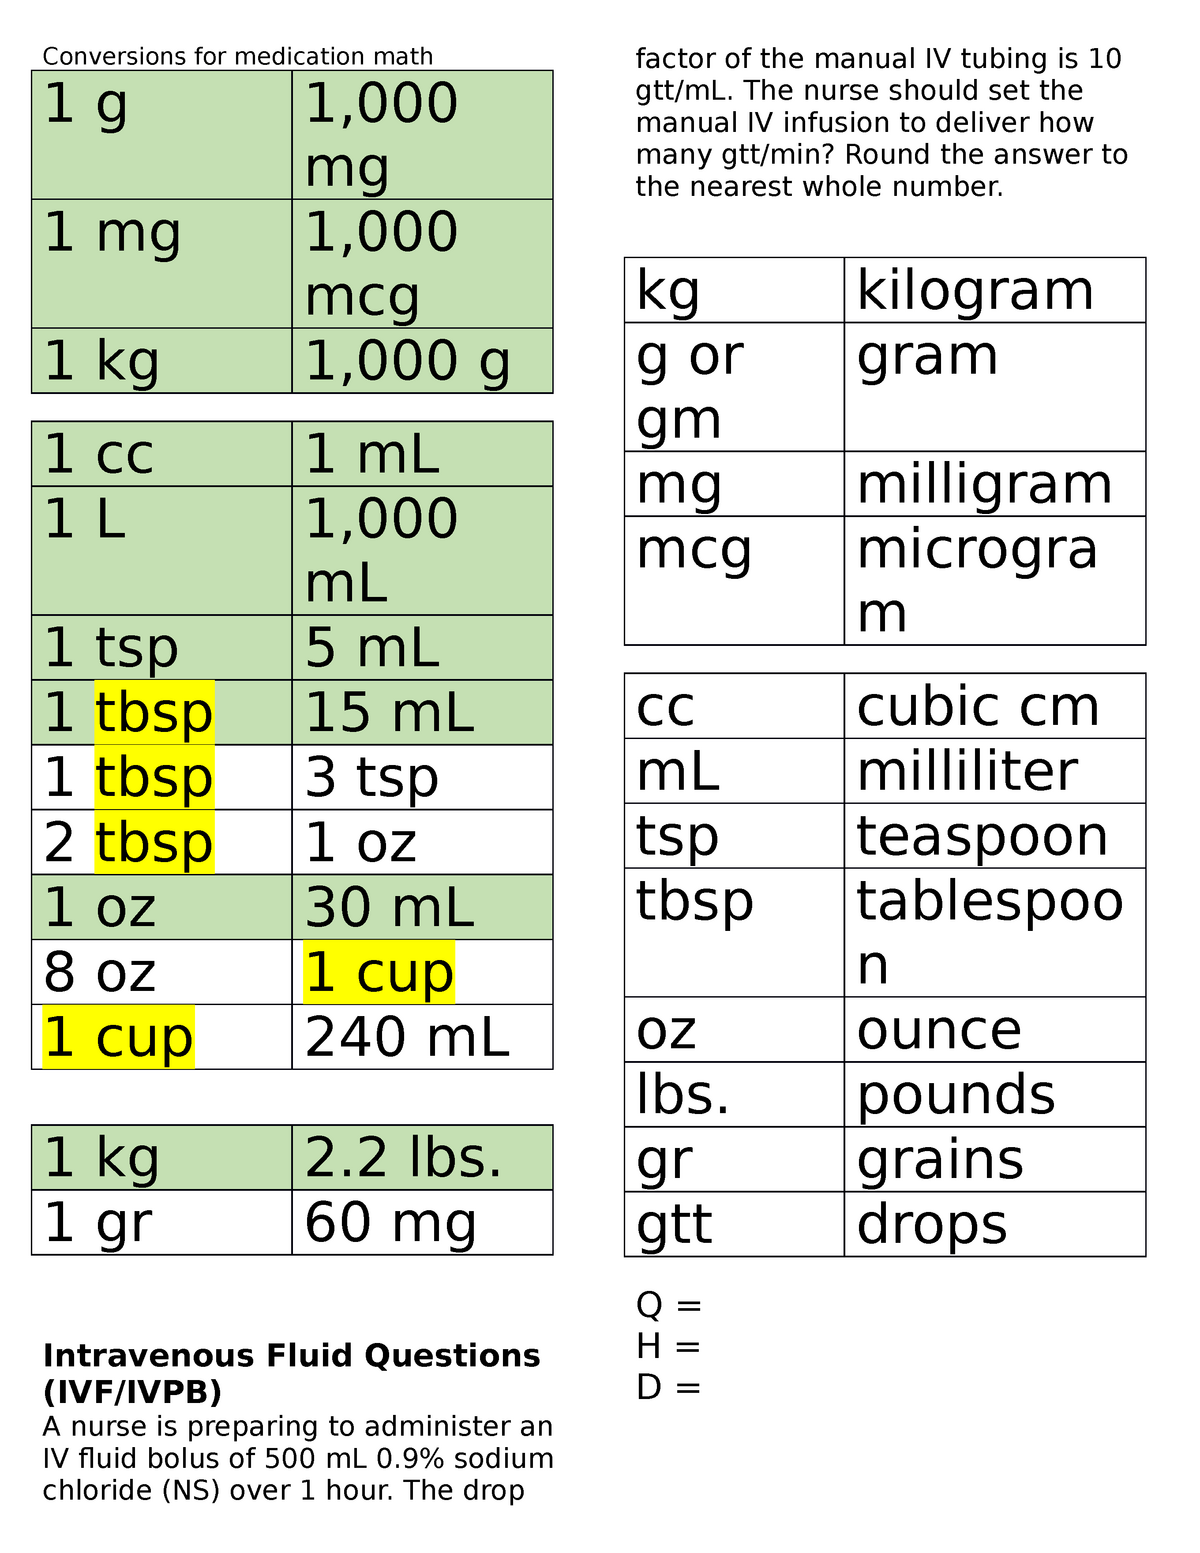 conversions-for-med-math-exam-conversions-for-medication-math-1-g-1-mg-1-mg-1-mcg-1-kg-1-000